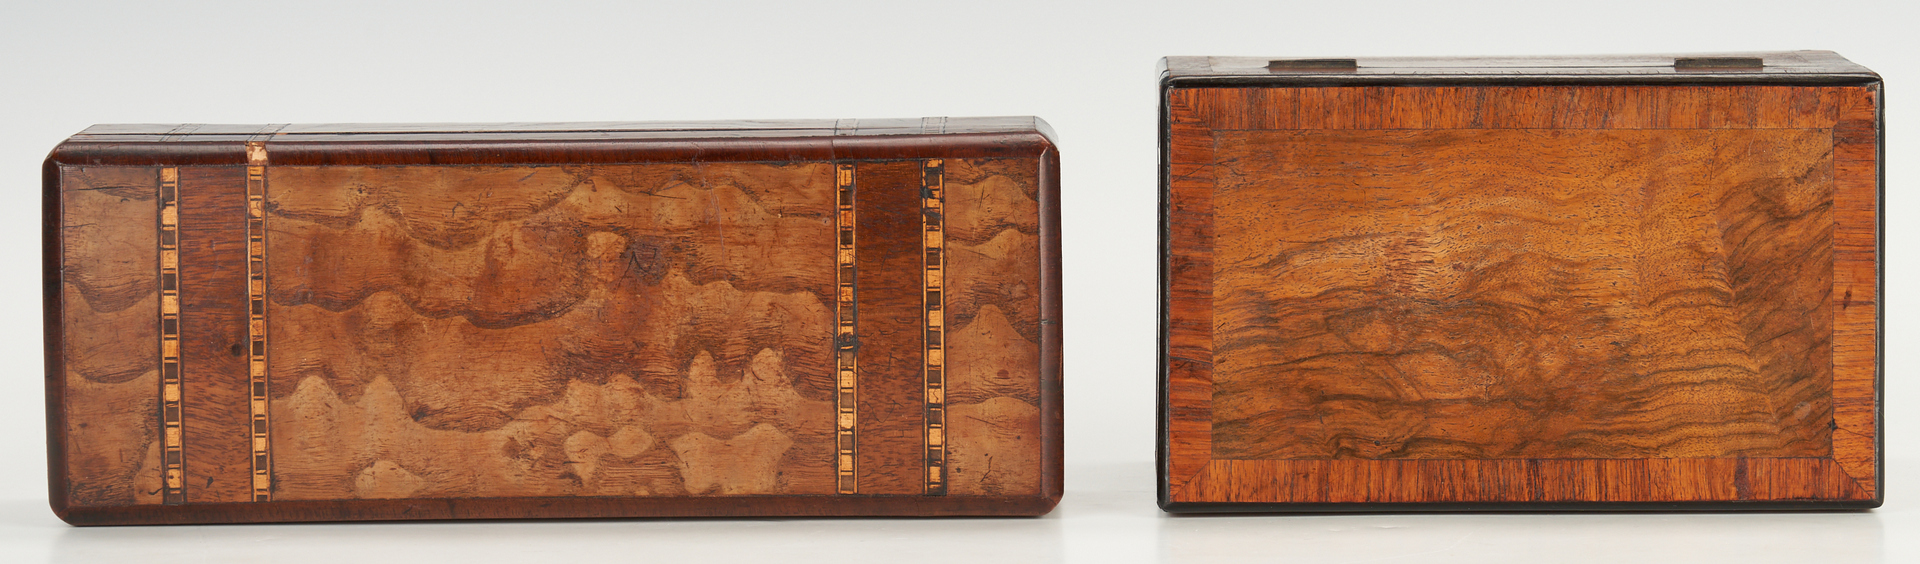 Lot 138: 4 Wooden Boxes, incl. Chinoiserie Tea Caddy & Apothecary Kit